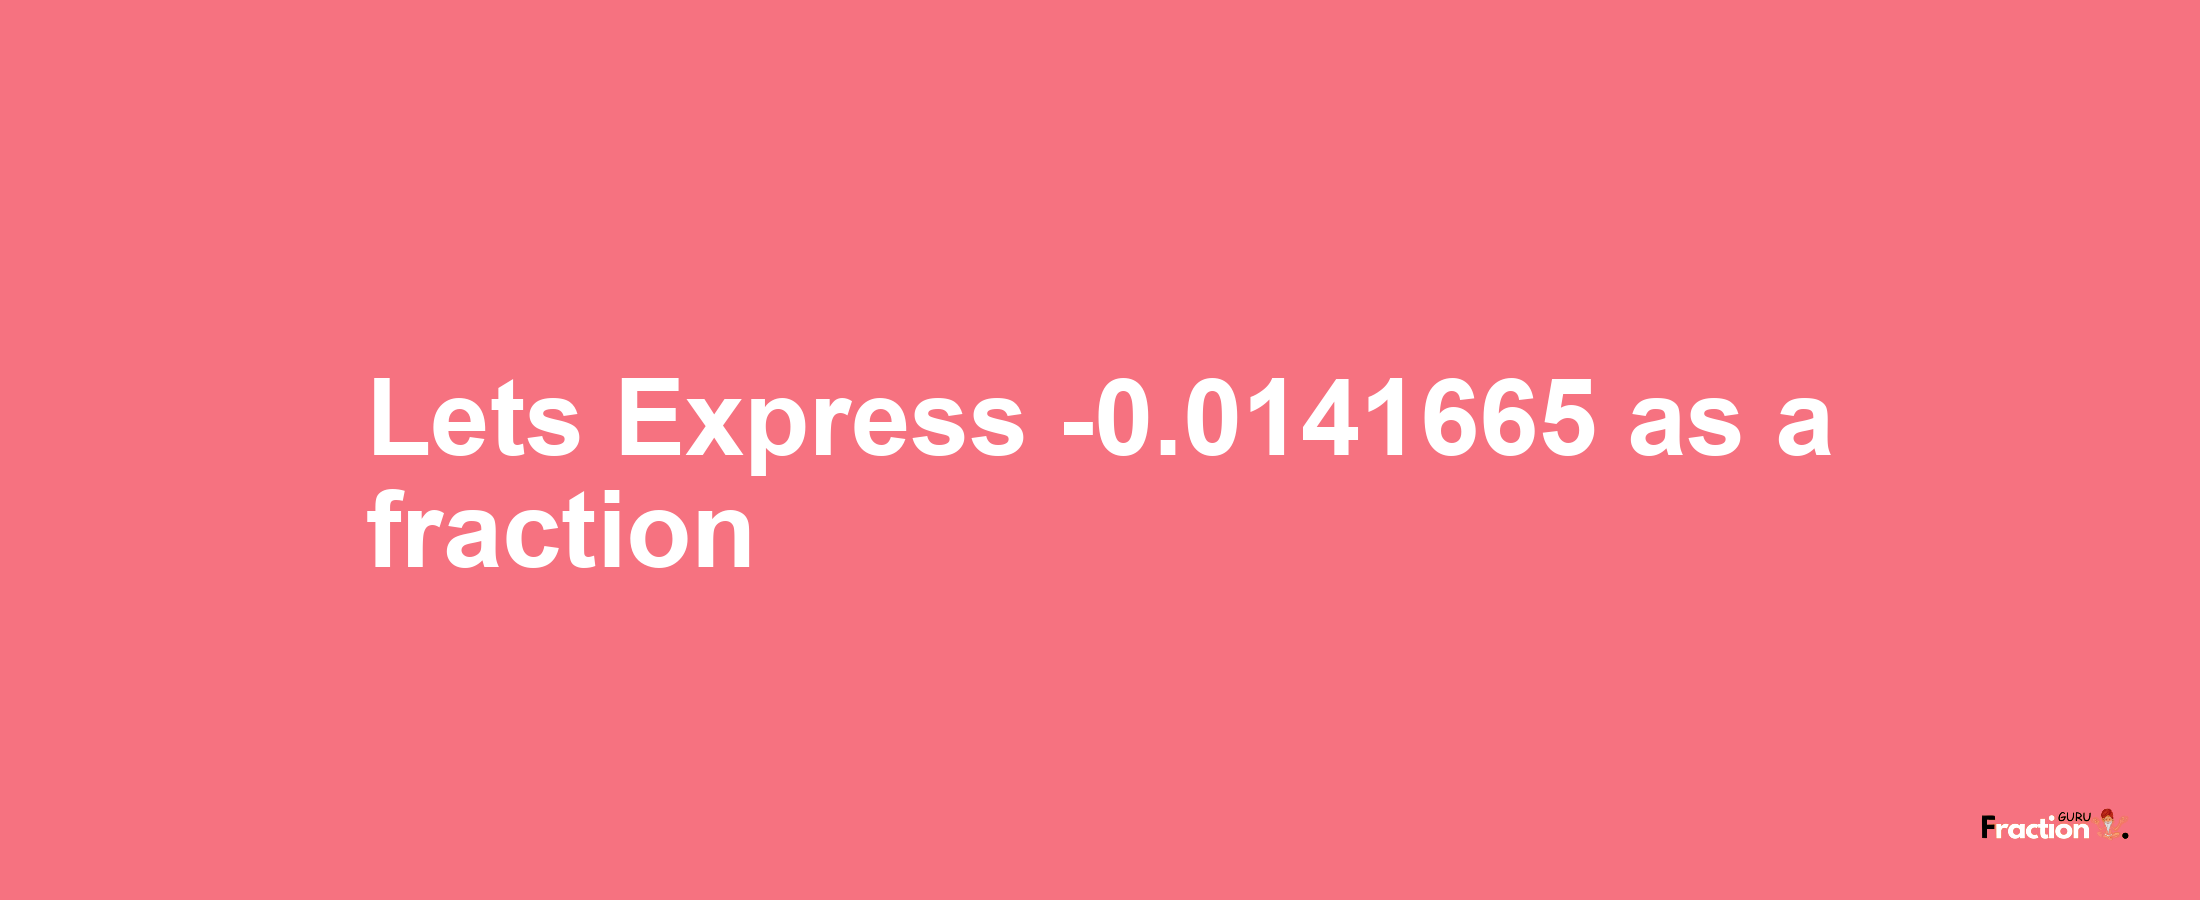 Lets Express -0.0141665 as afraction